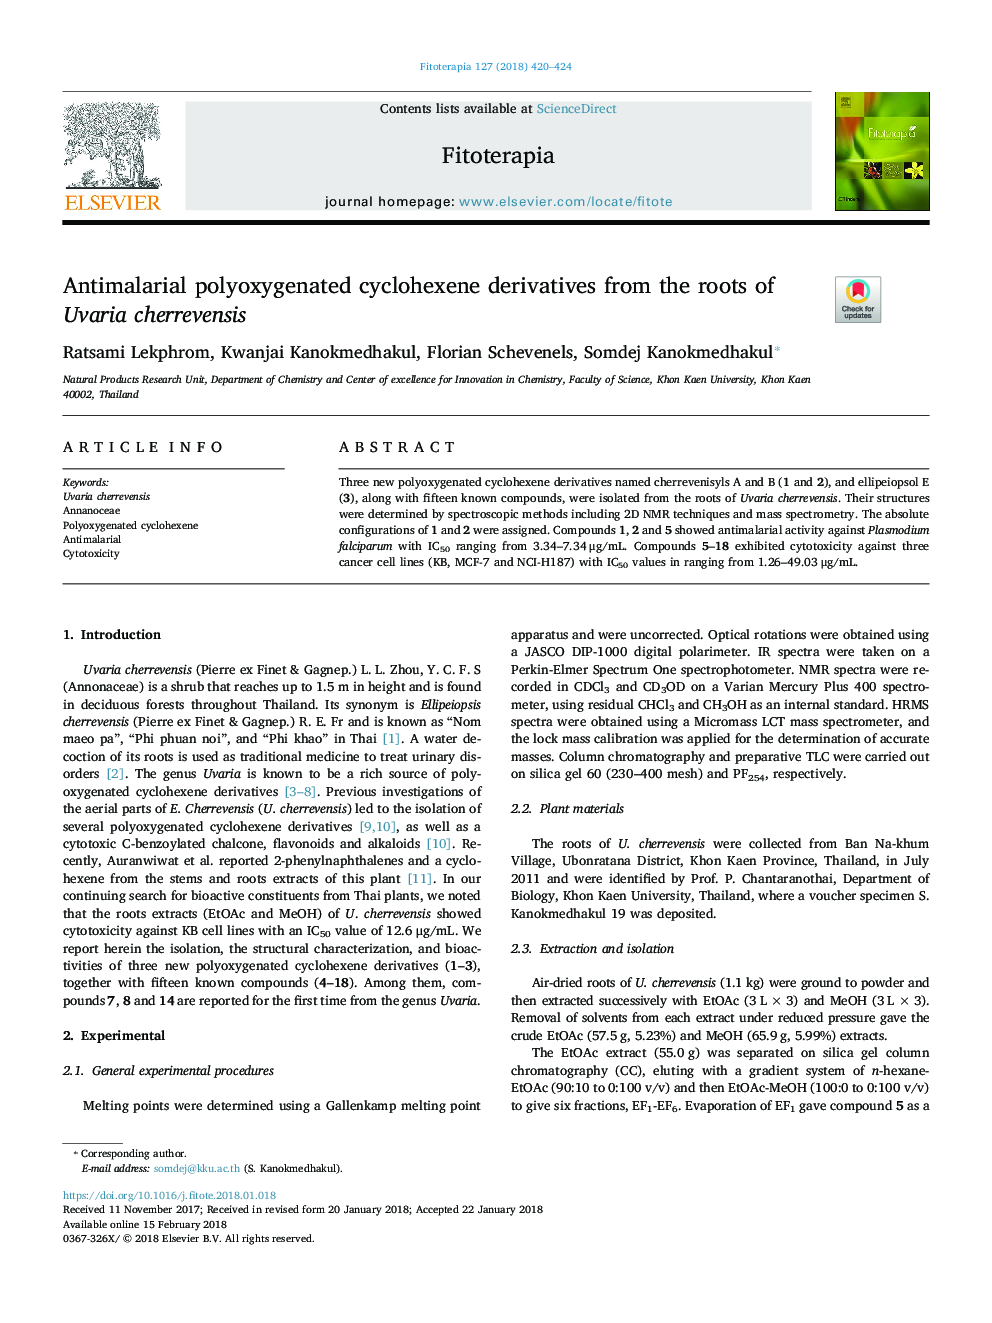 Antimalarial polyoxygenated cyclohexene derivatives from the roots of Uvaria cherrevensis